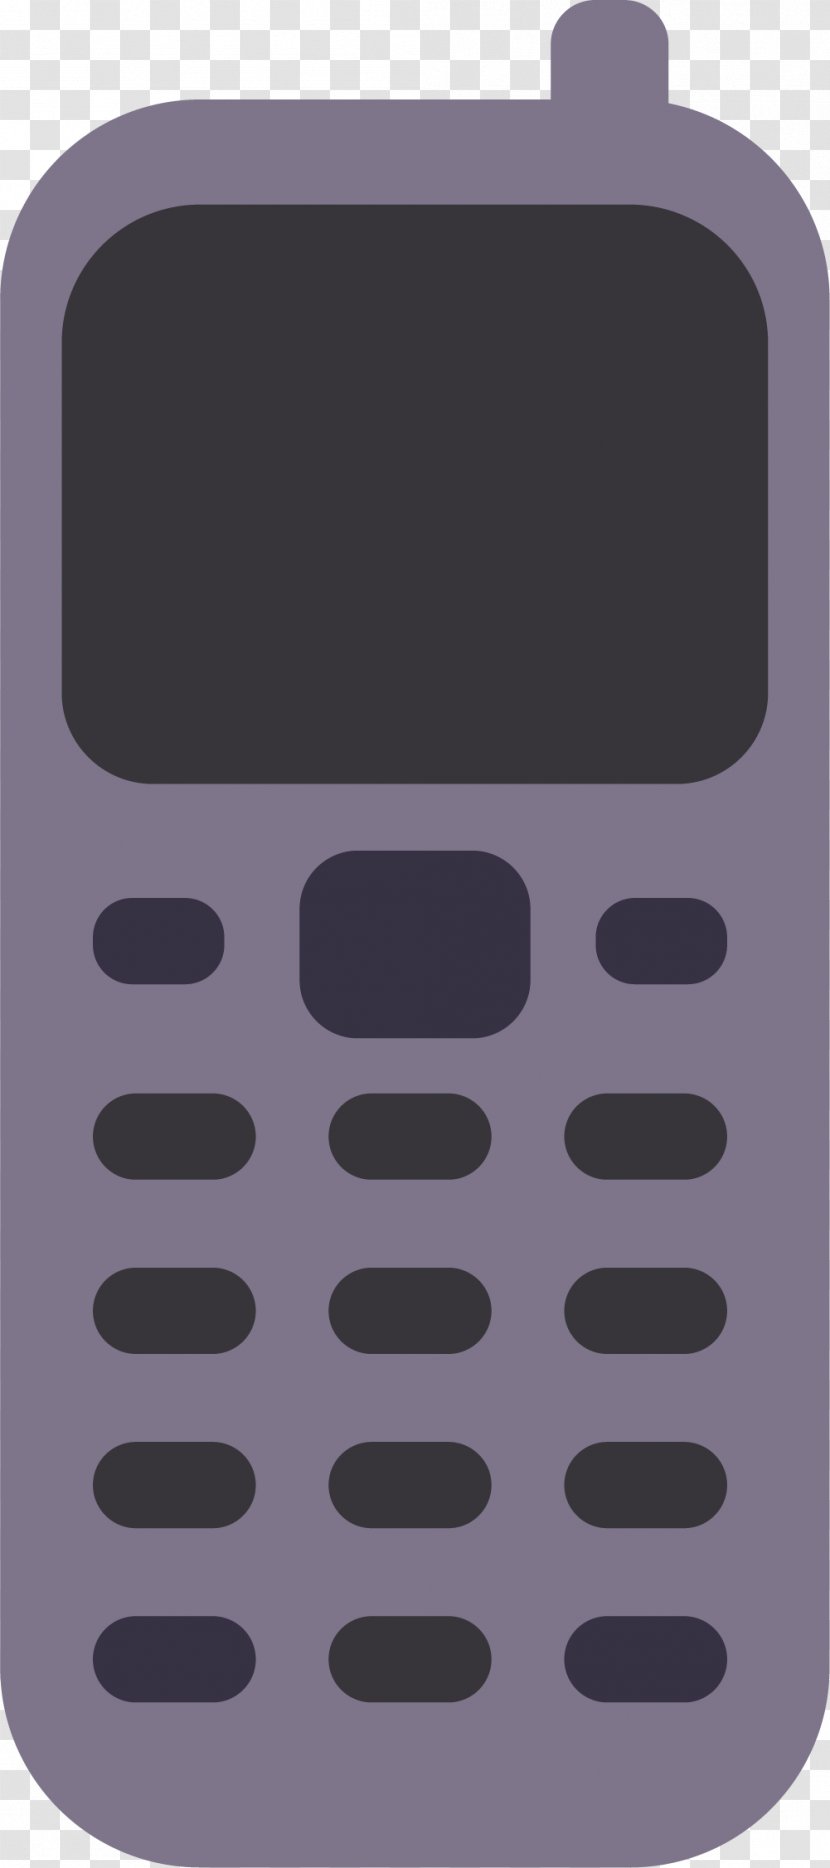 Feature Phone Mobile Telephone Smartphone - Purple - Second Hand Transparent PNG